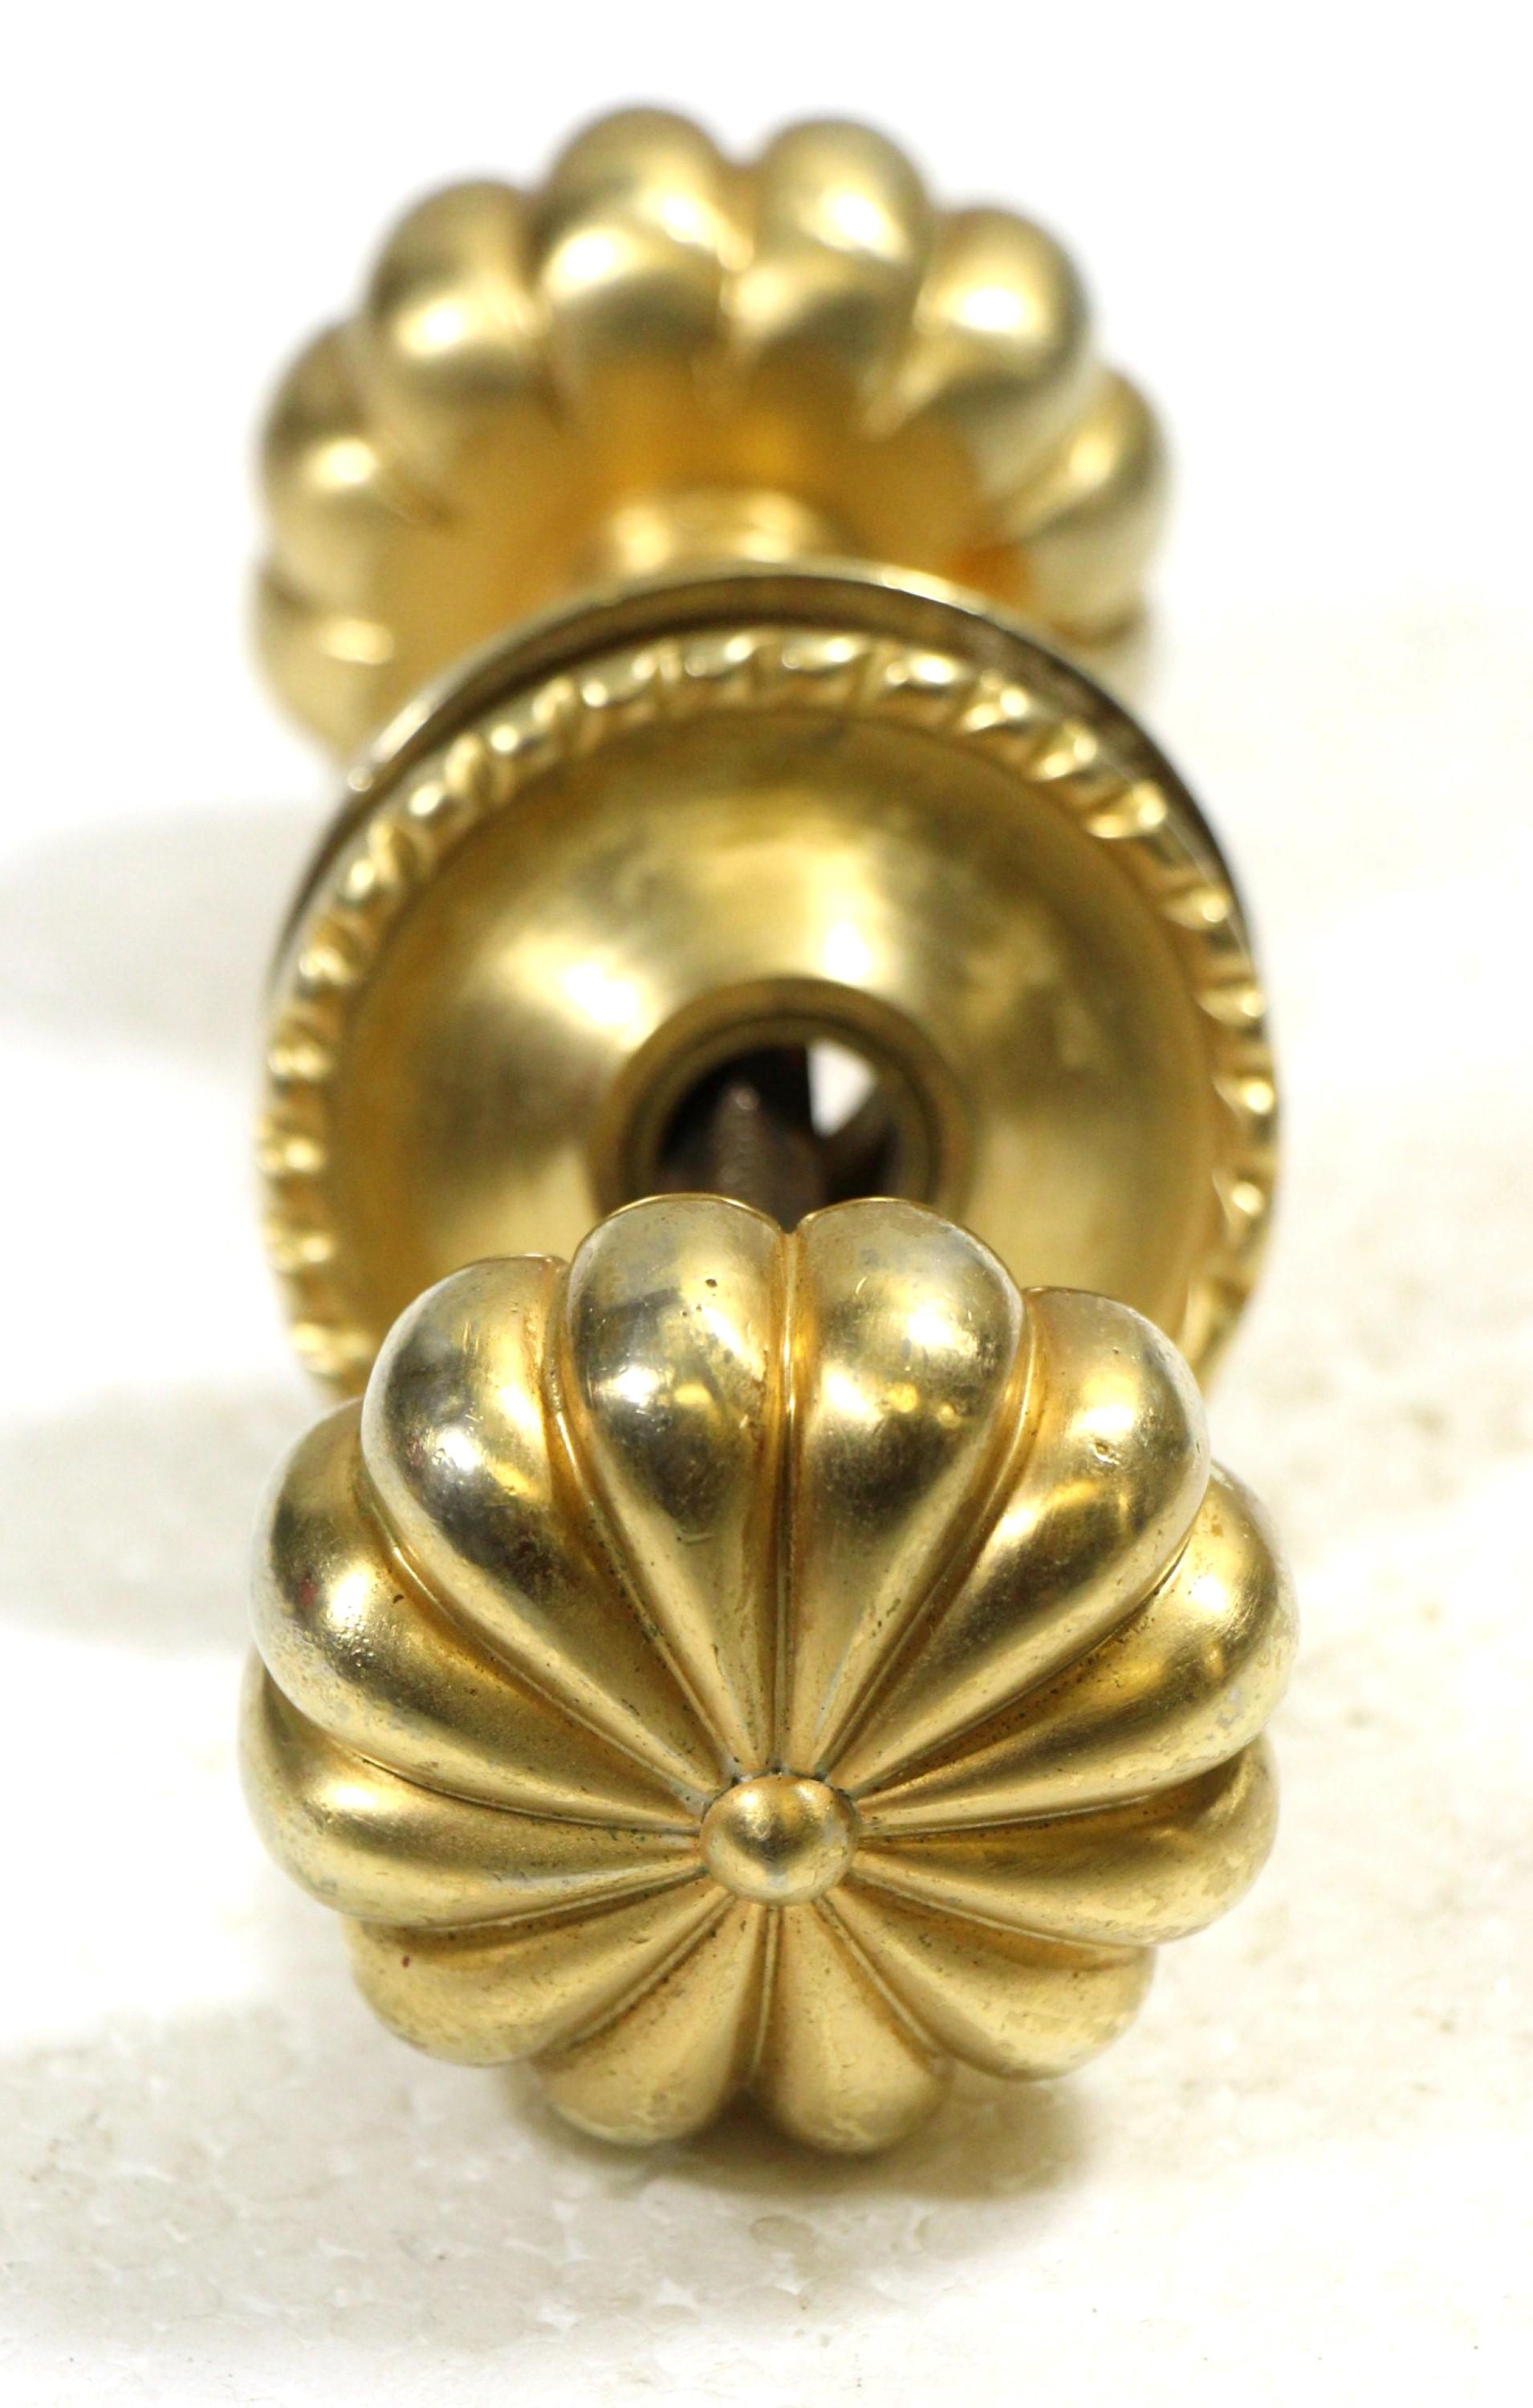 Brass doorknob set with beading and fluting. Each set includes five pieces consisting of two knobs with a spindle and two rosettes. Small quantity available at time of posting. Priced each. Please inquire. Please note, this item is located in our